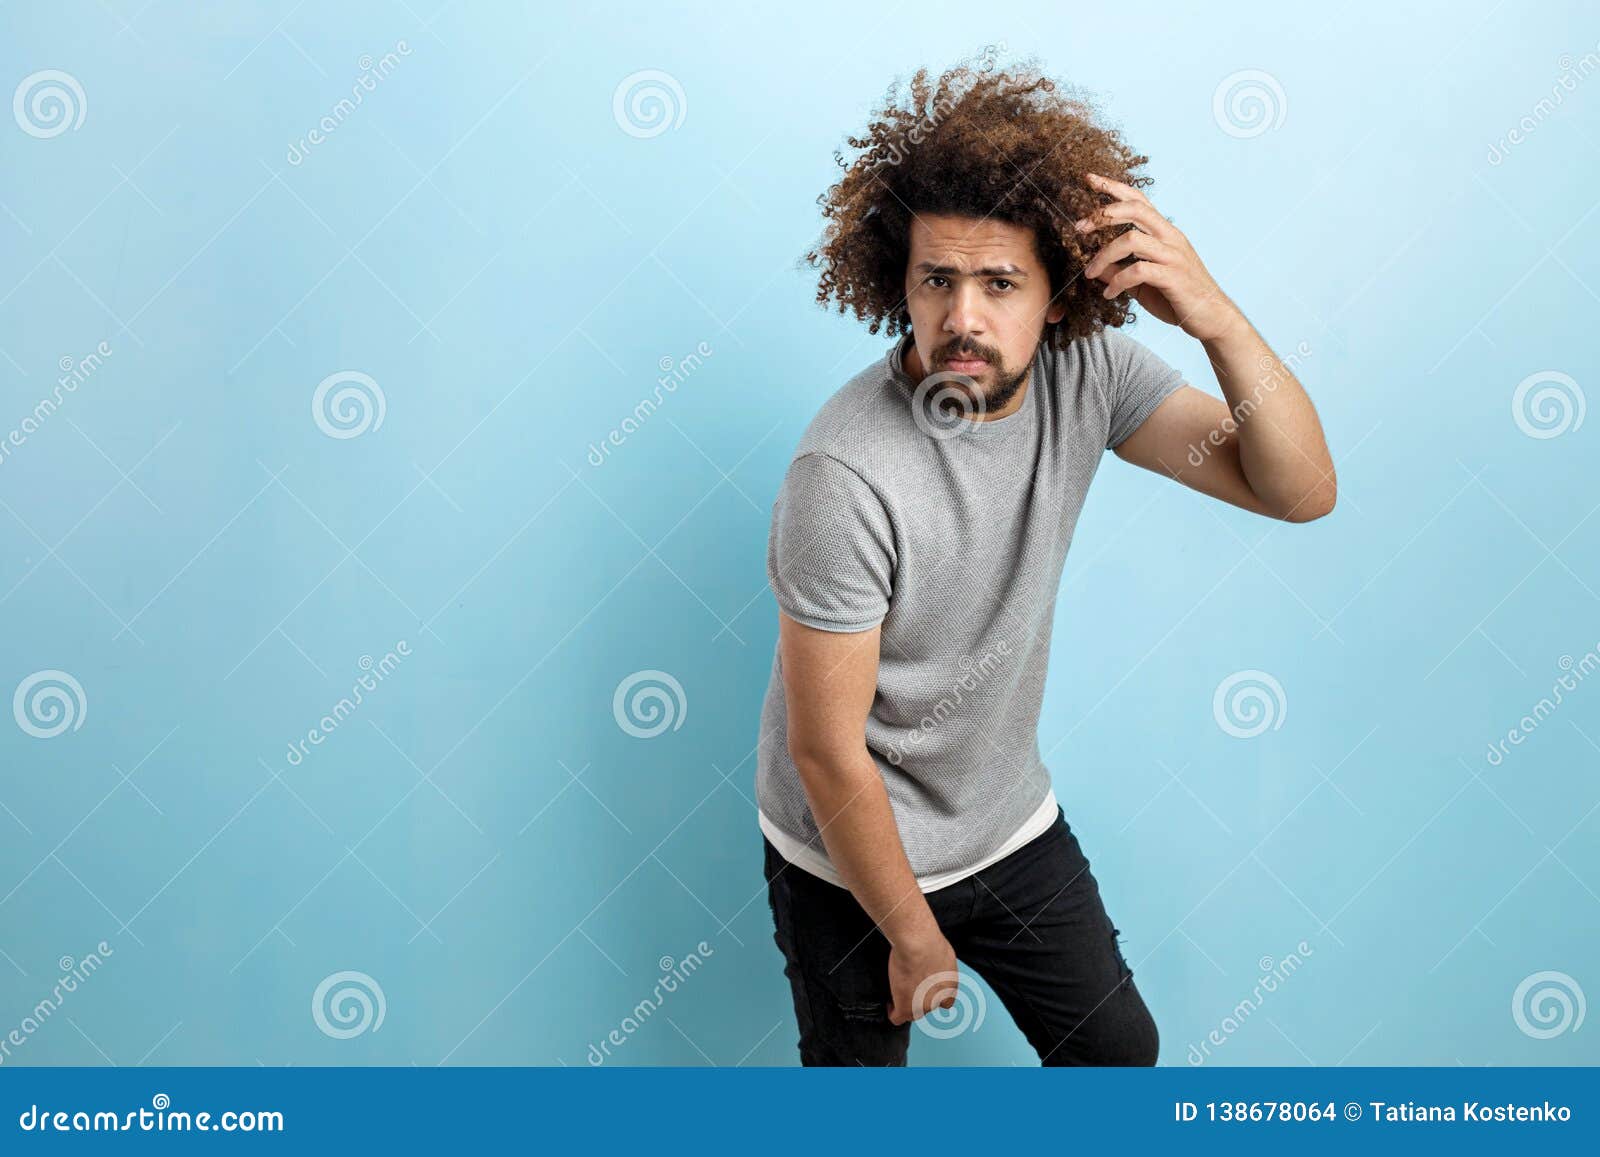 A Curly-headed Handsome Man Wearing a Gray T-shirt is Standing, Leaning ...